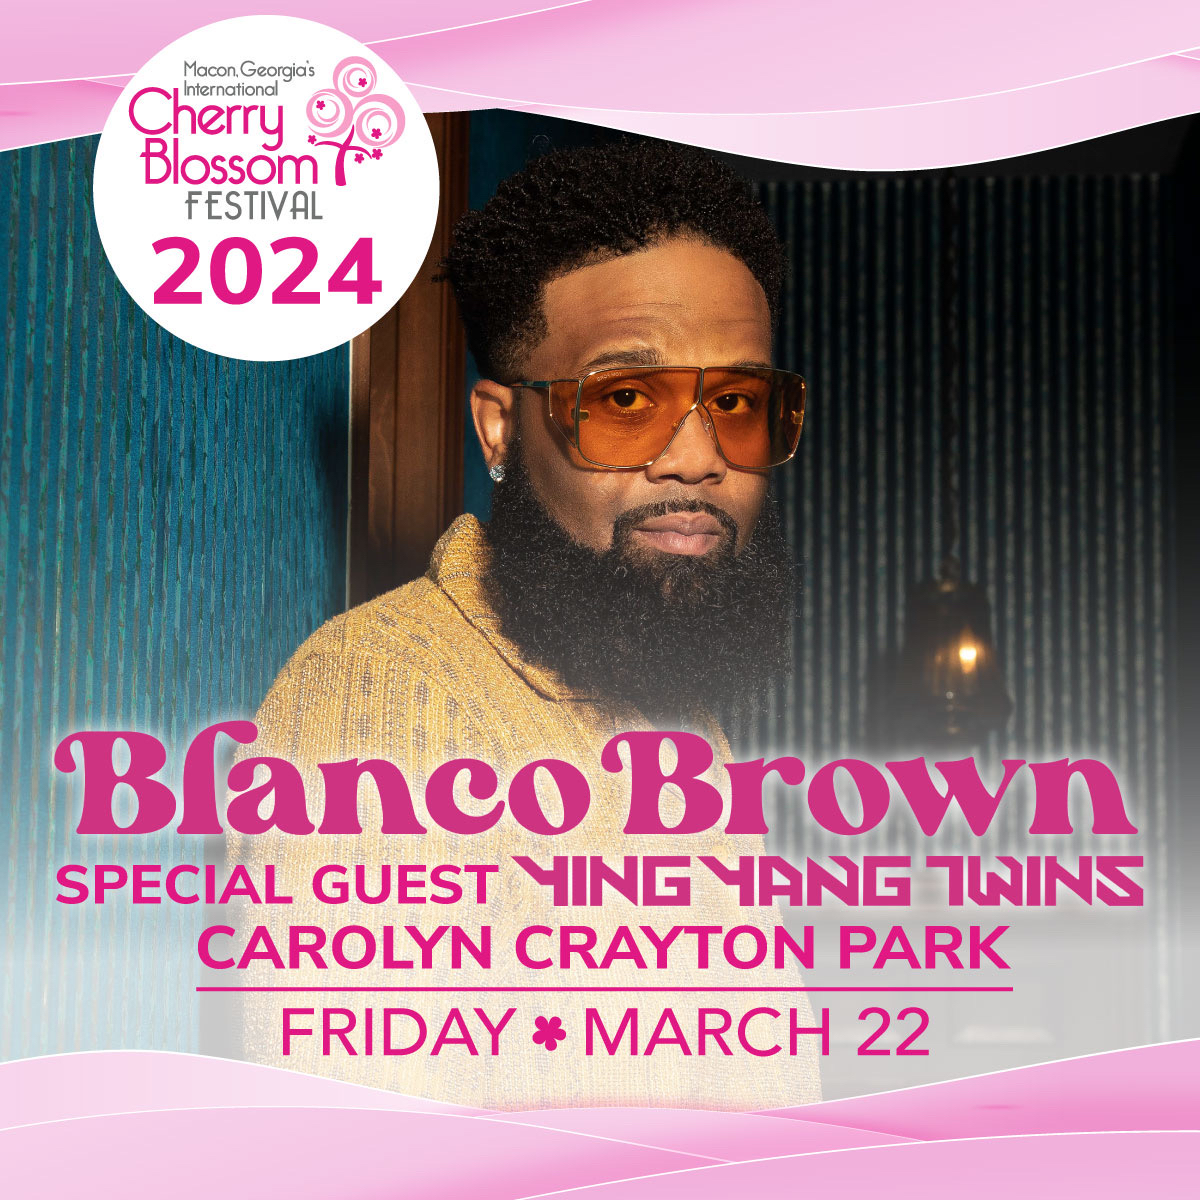 Cherry Blossom Announces Blanco Brown with Special Guests The Ying Yang Twins at 2024 Festival